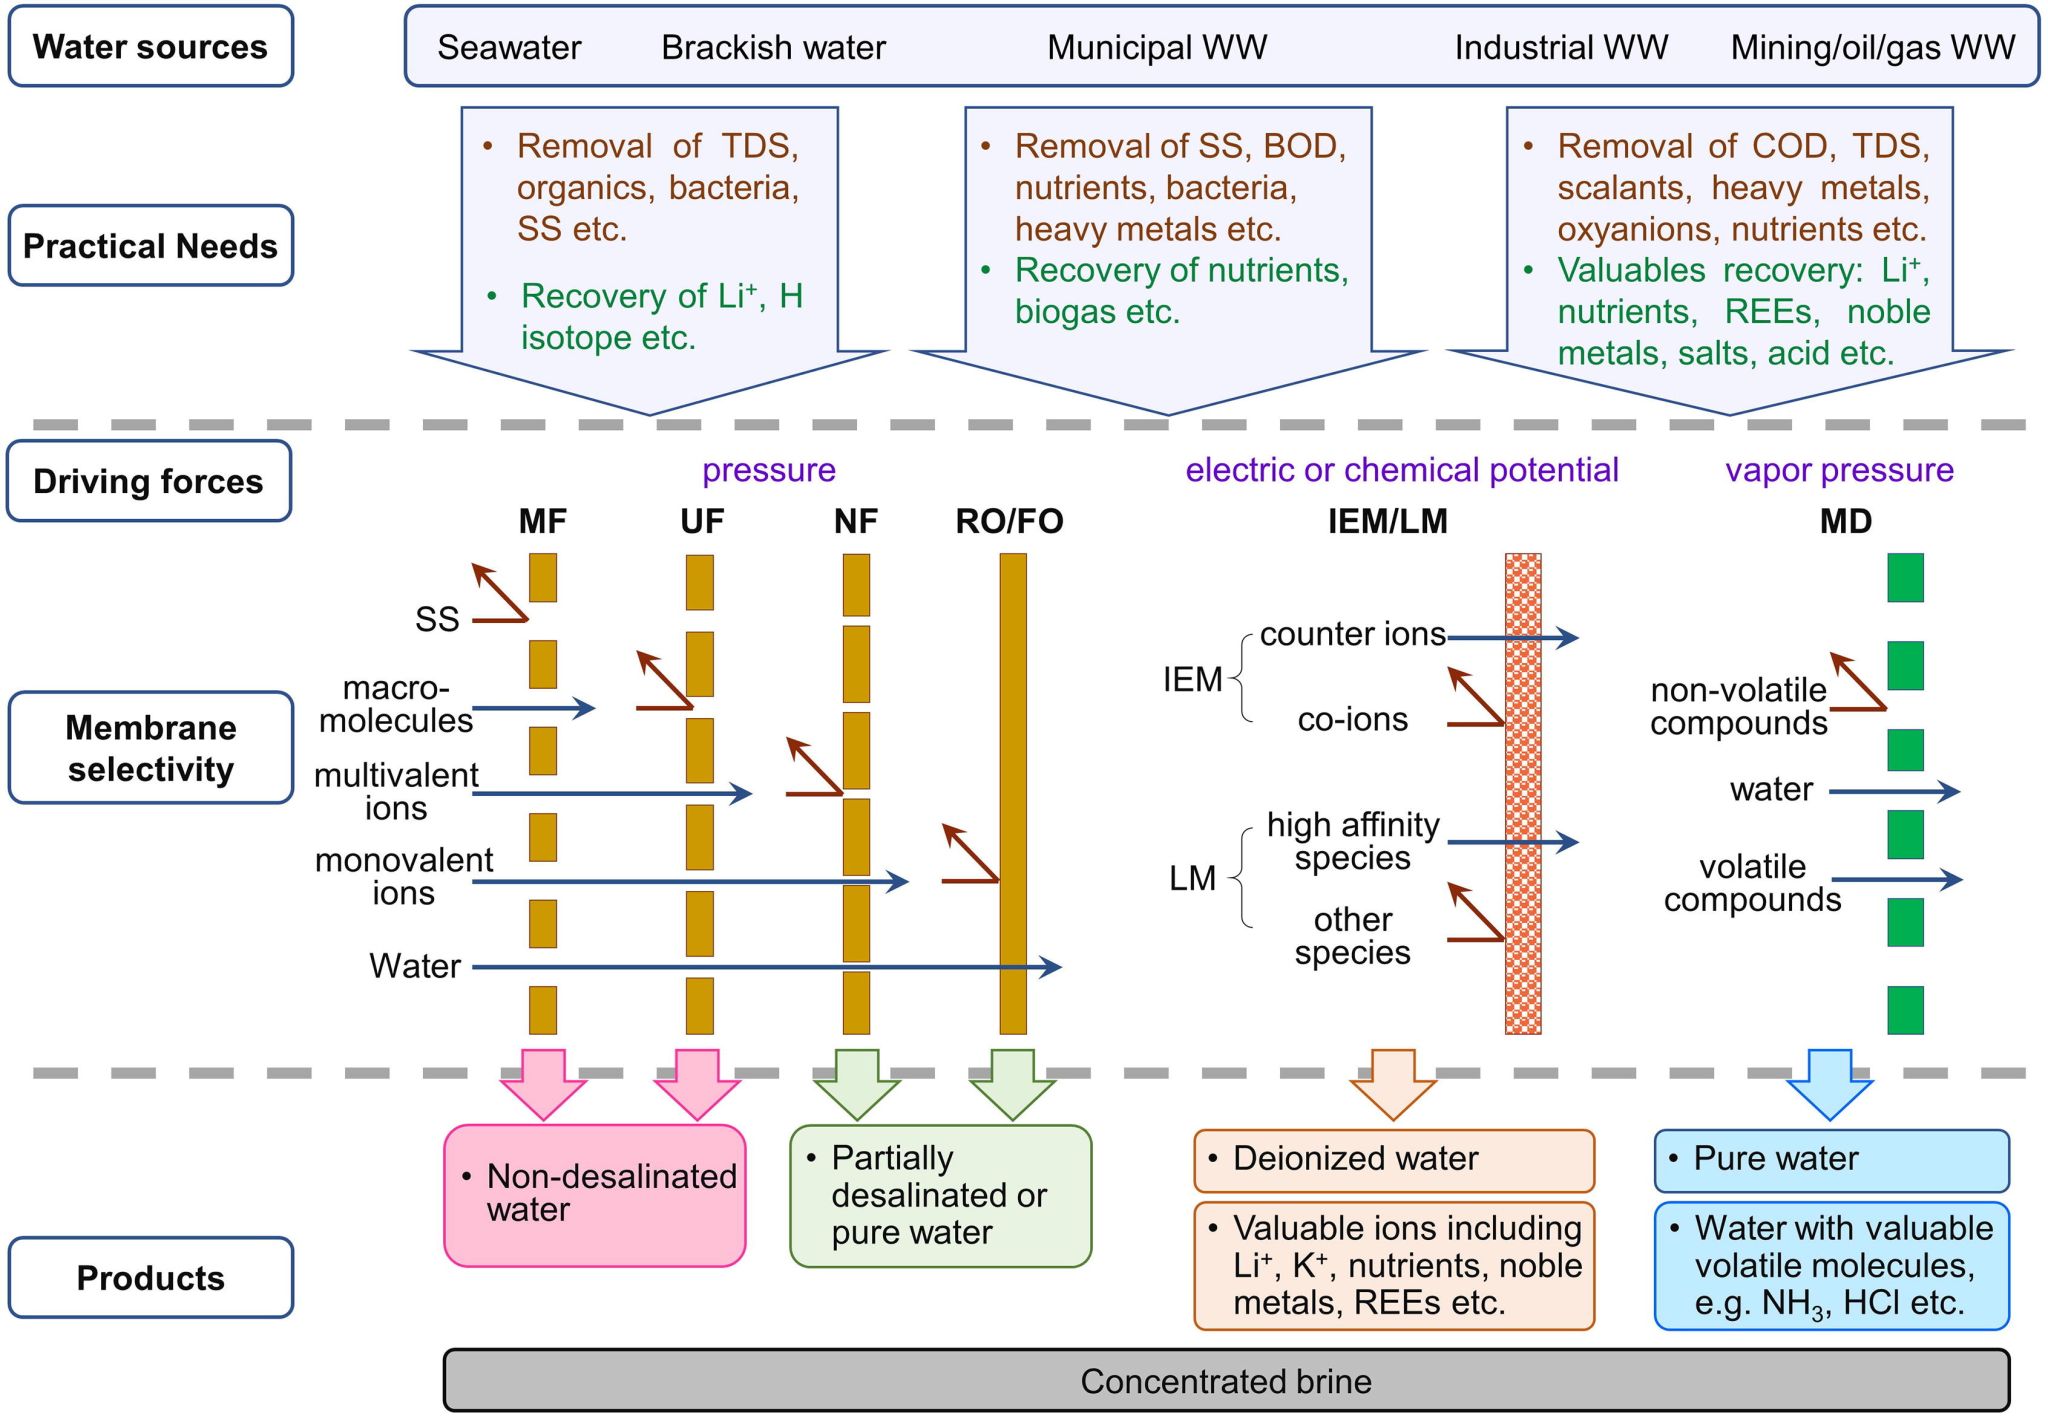 High Selectivity Membranes for Water Treatment: A Review of Materials, Mechanisms, and Future Directions 💦Introduction 💦Membrane separatio...